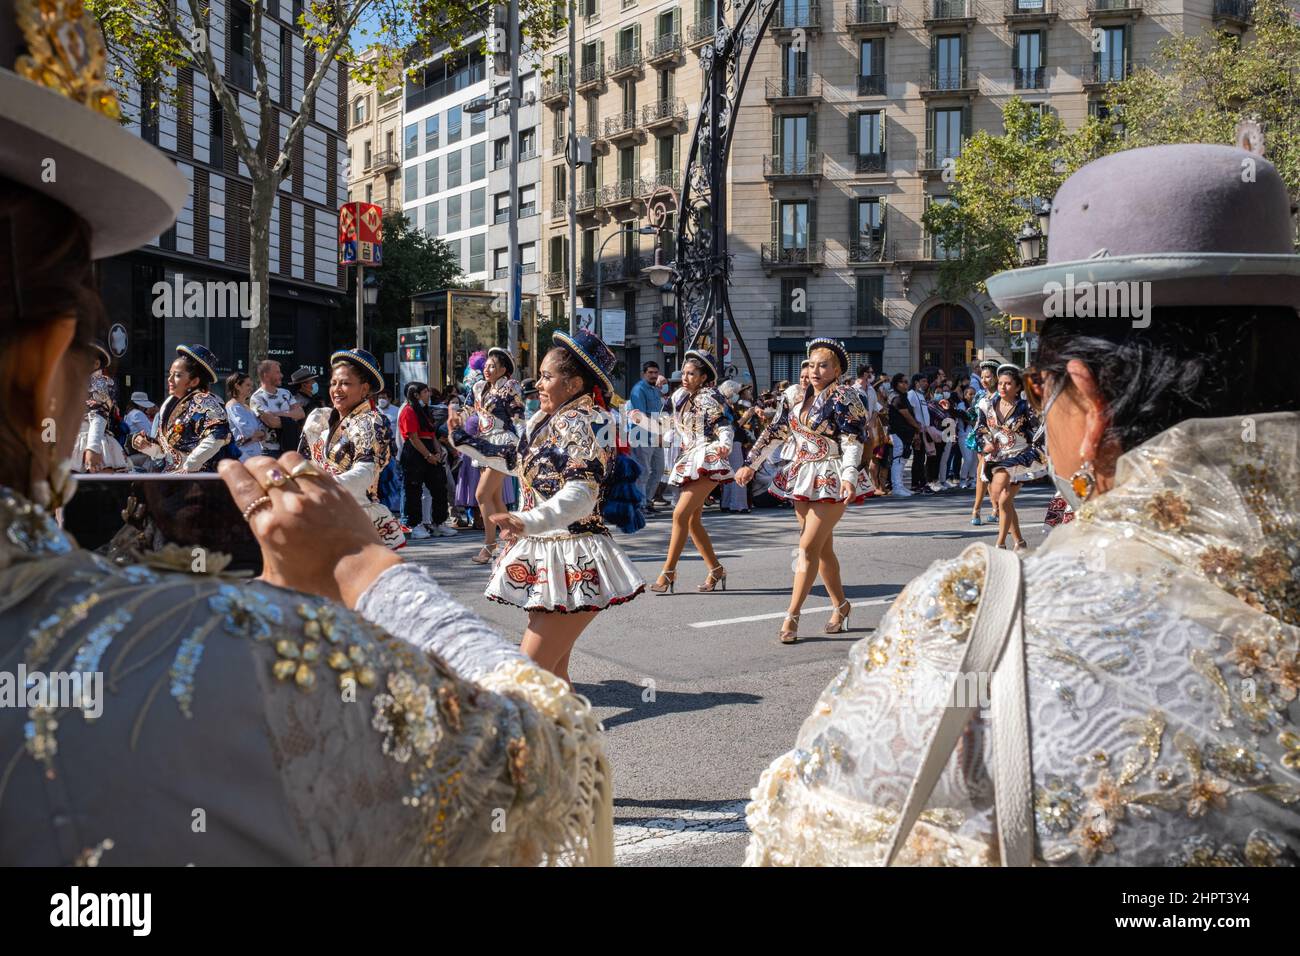 Bolivian women dressed in traditional outfits and hats performing during Dia de la Hispanidad (Hispanic Heritage Day) at Gracia Avenue in Barcelona Stock Photo